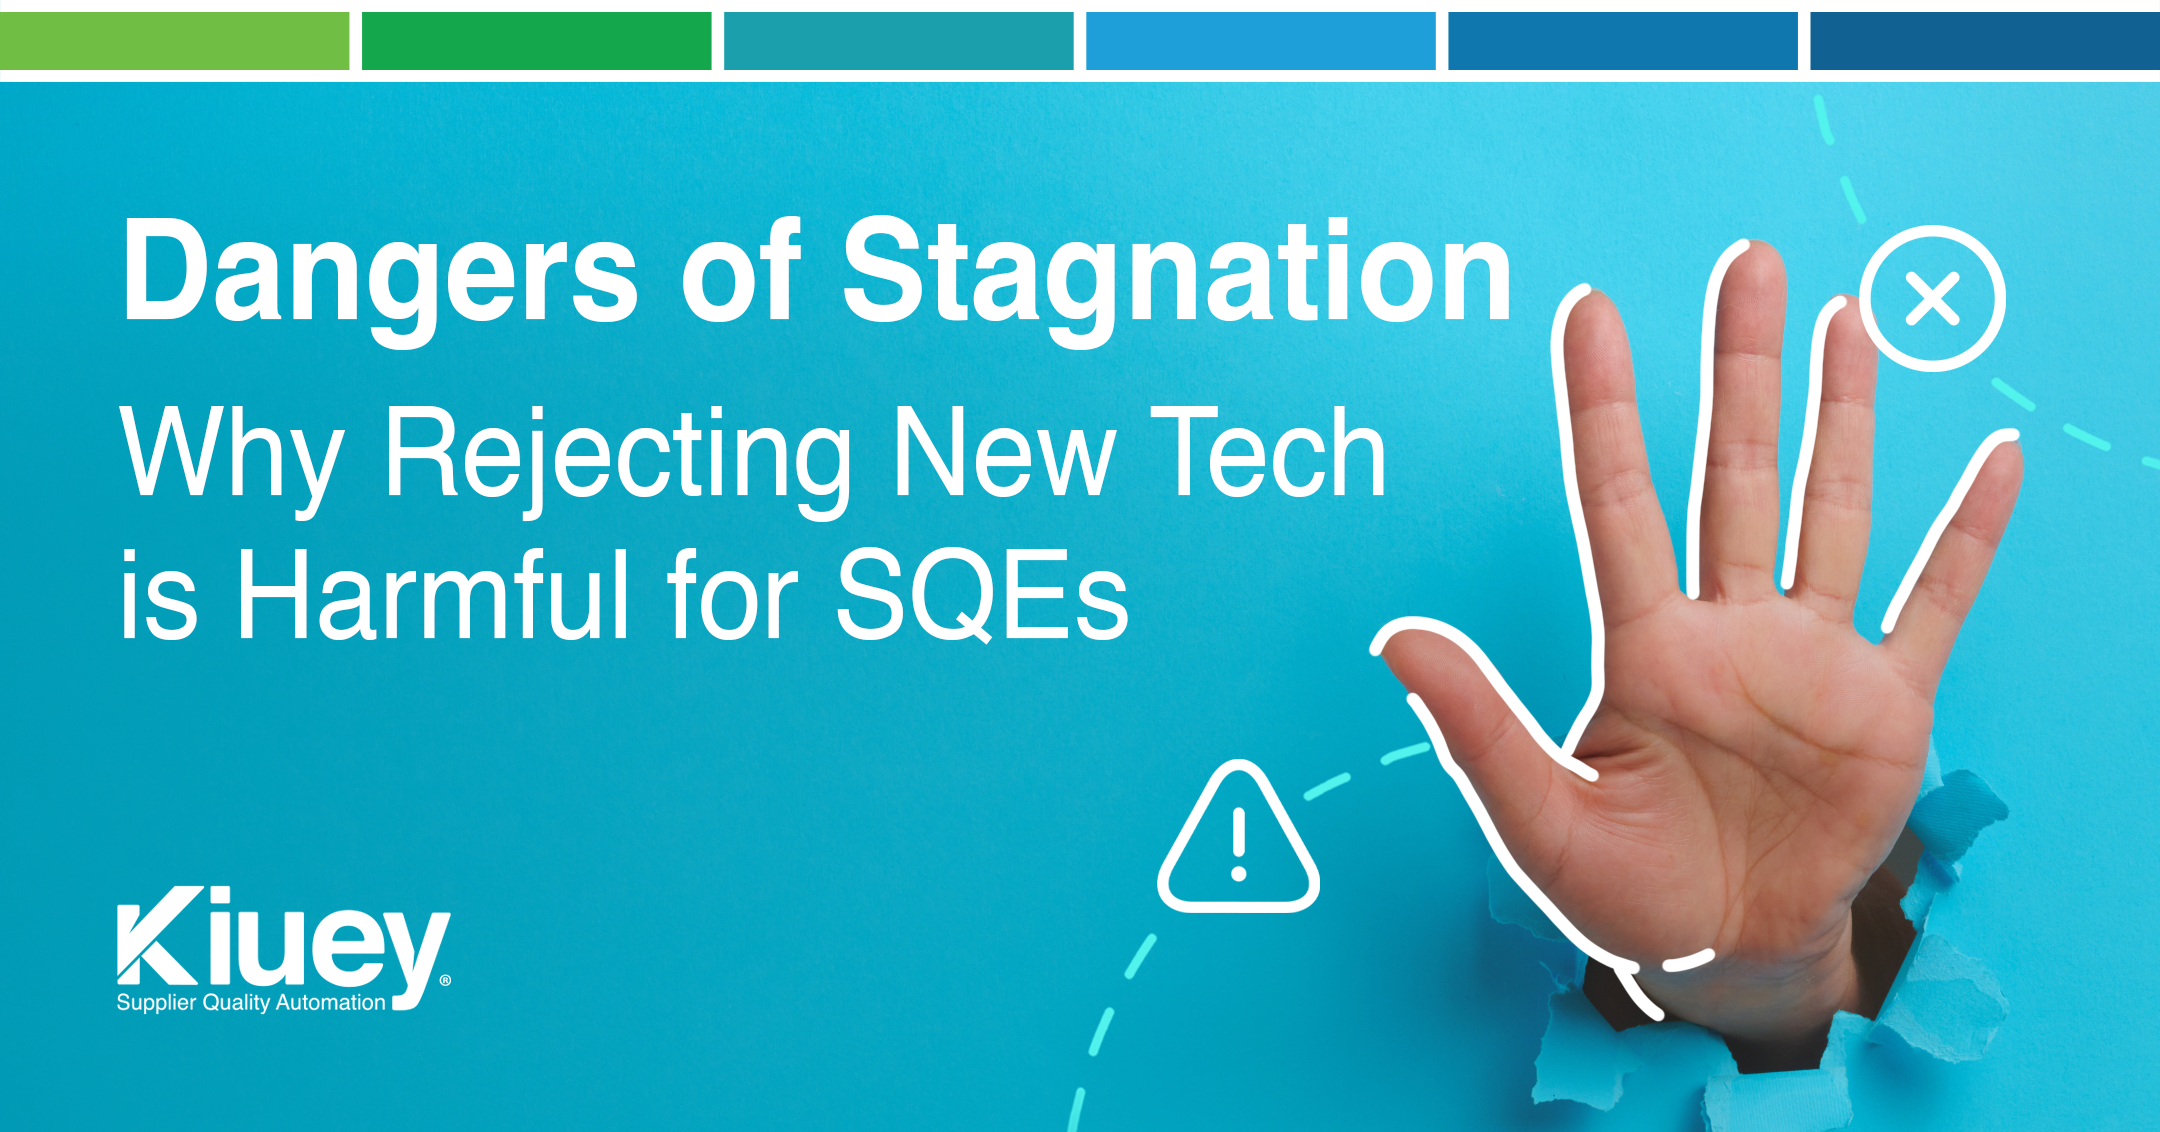 Dangers of Stagnation: Why Rejecting New Technology is Harmful for SQEs